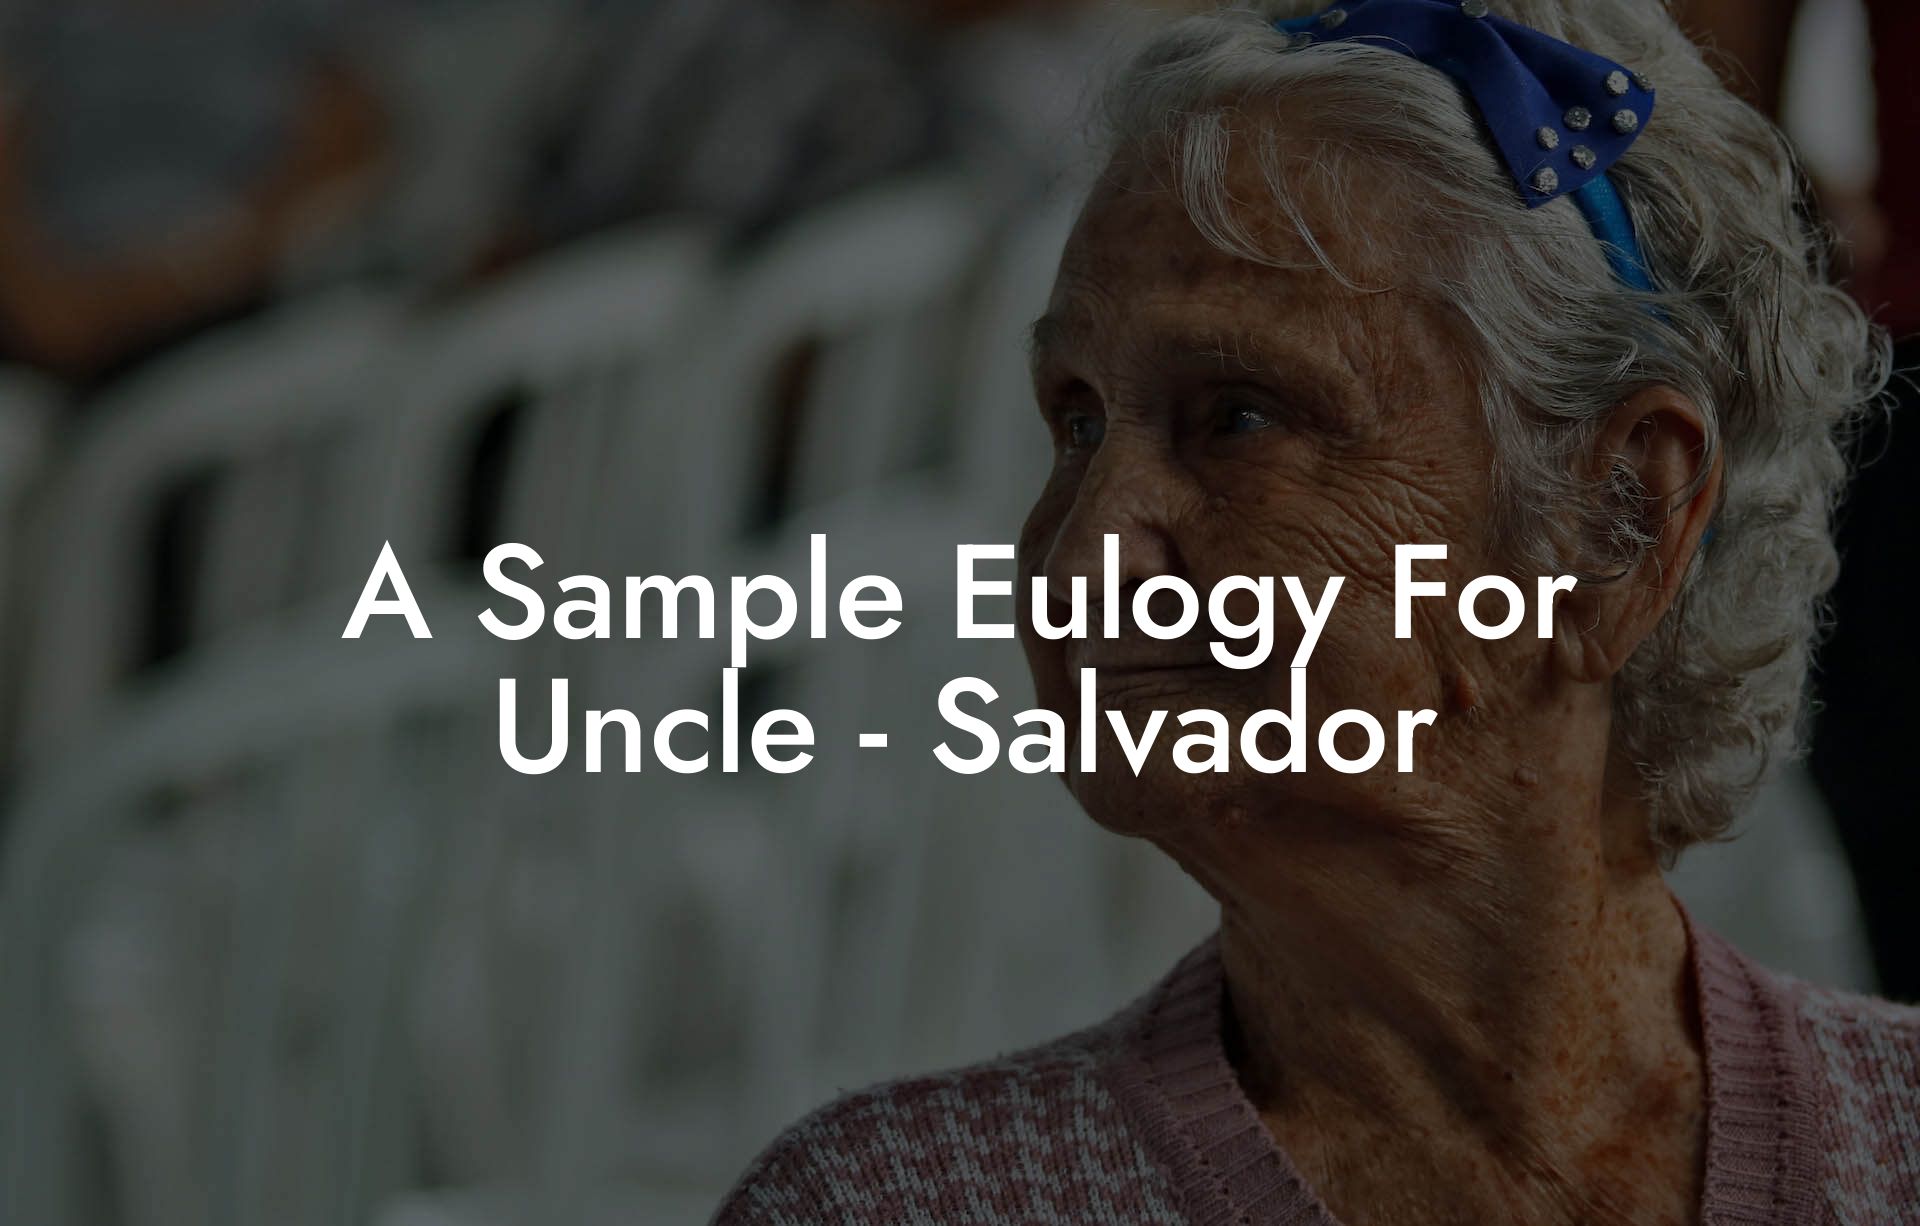 A Sample Eulogy For Uncle - Salvador